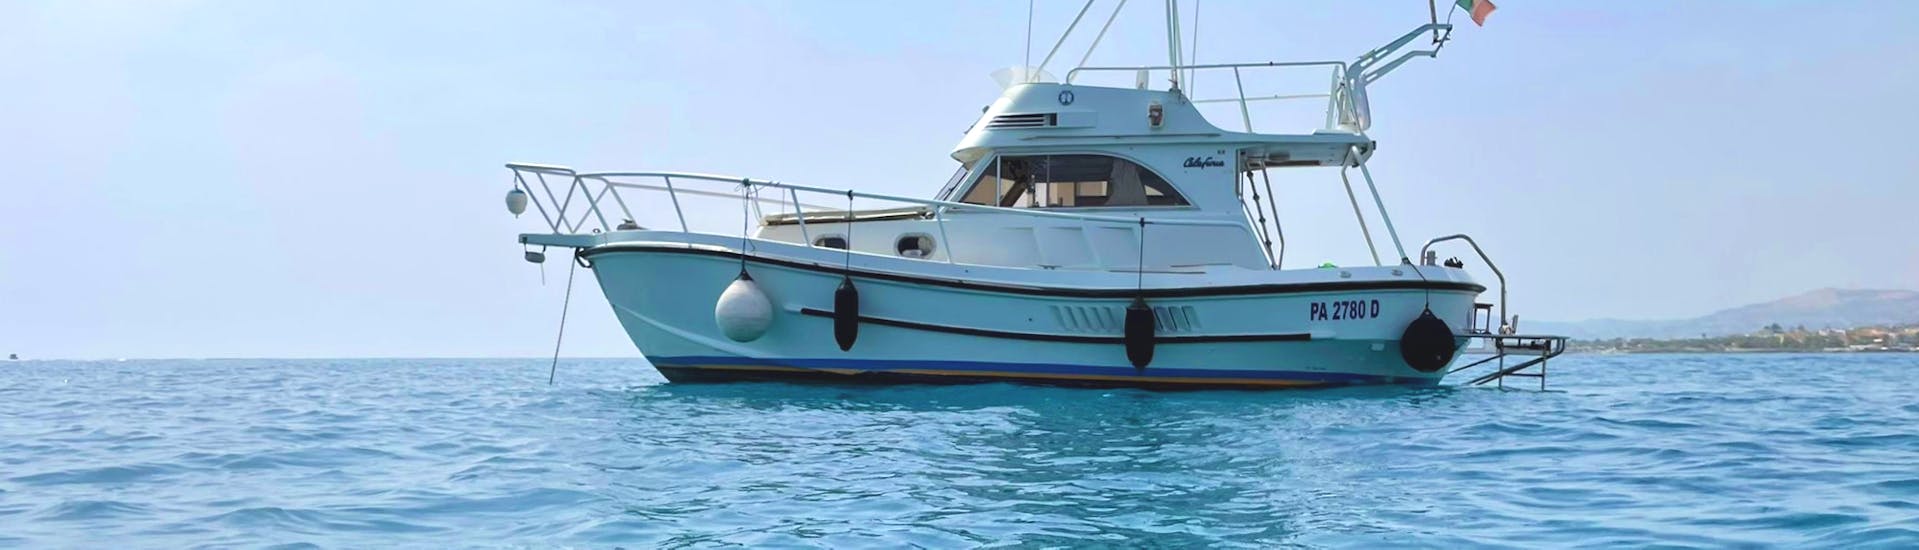 Picture of the boat used by Sea Adventure of Sarah for the Boat Trip from Agrigento to the Stair of the Turks.